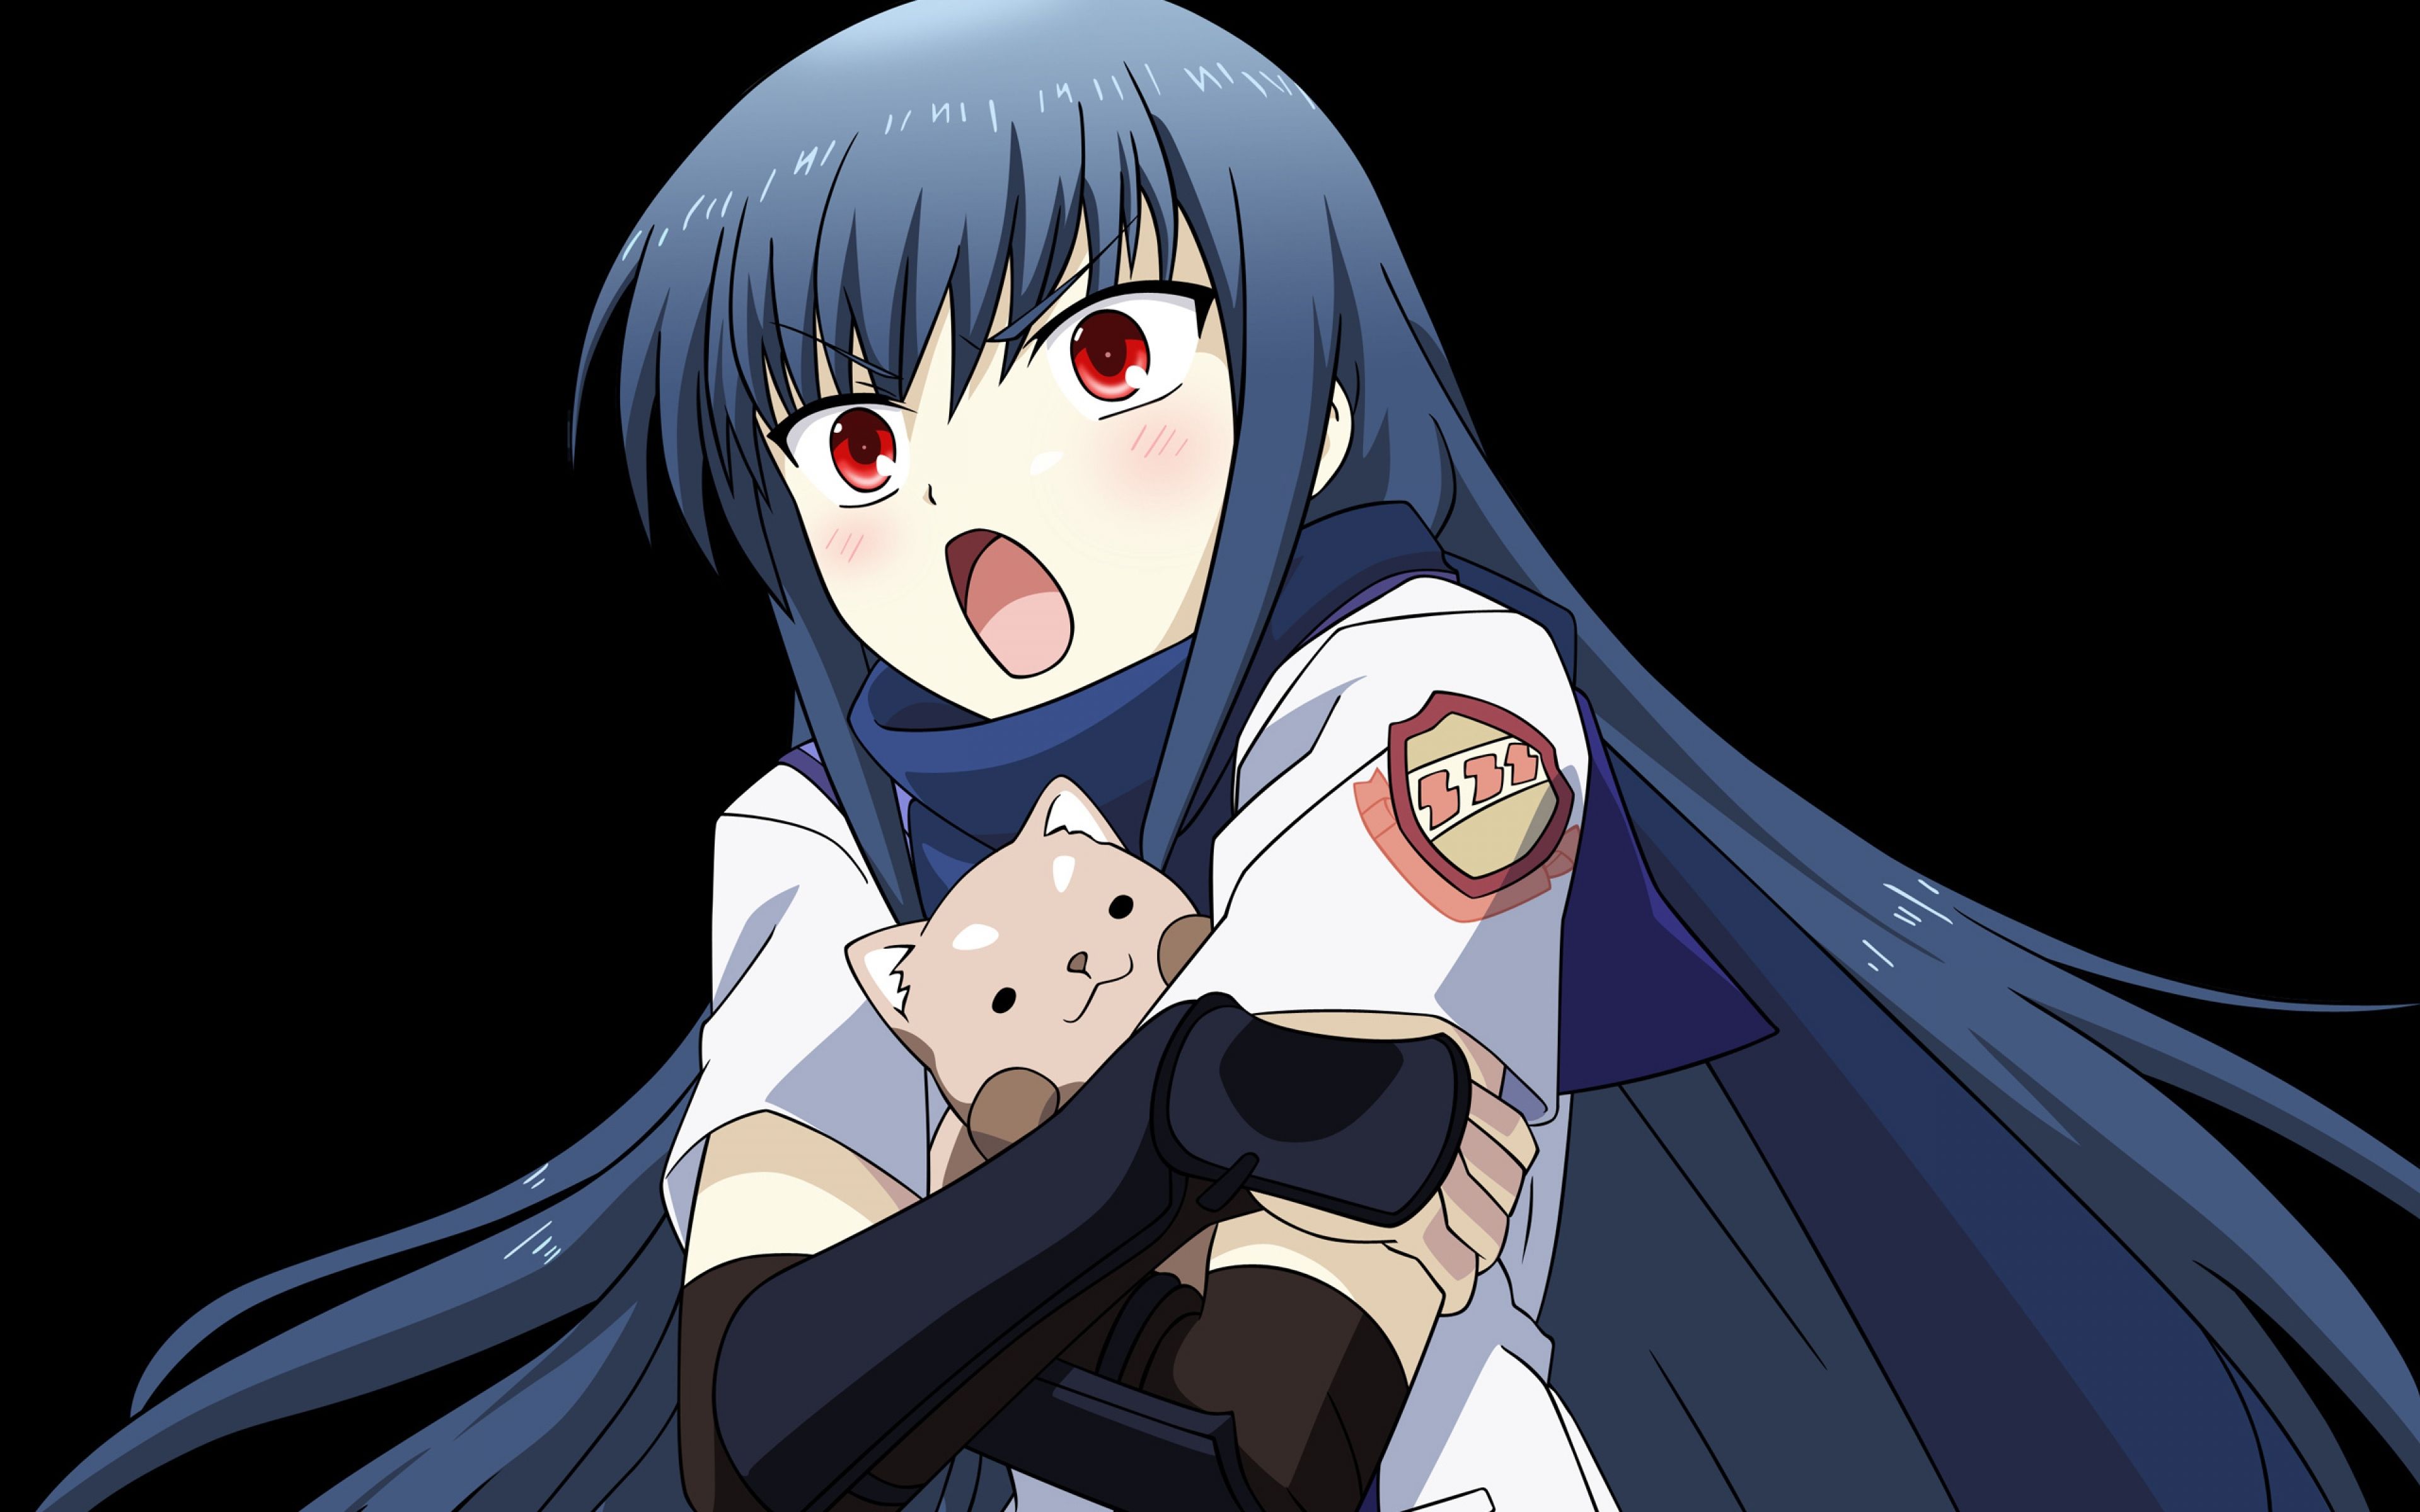 Download wallpaper from anime Angel Beats! with tags: Windows 8